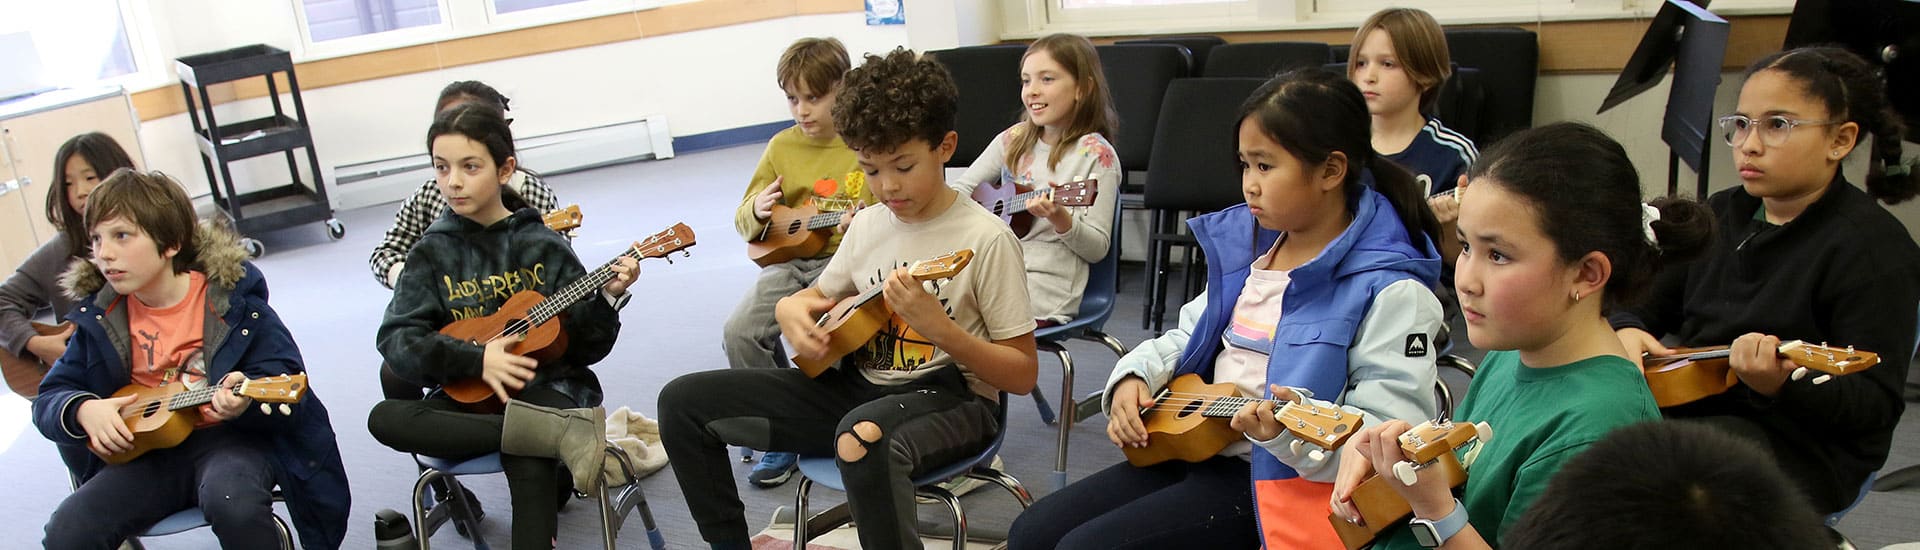 A fourth grade music class plays ukulele together